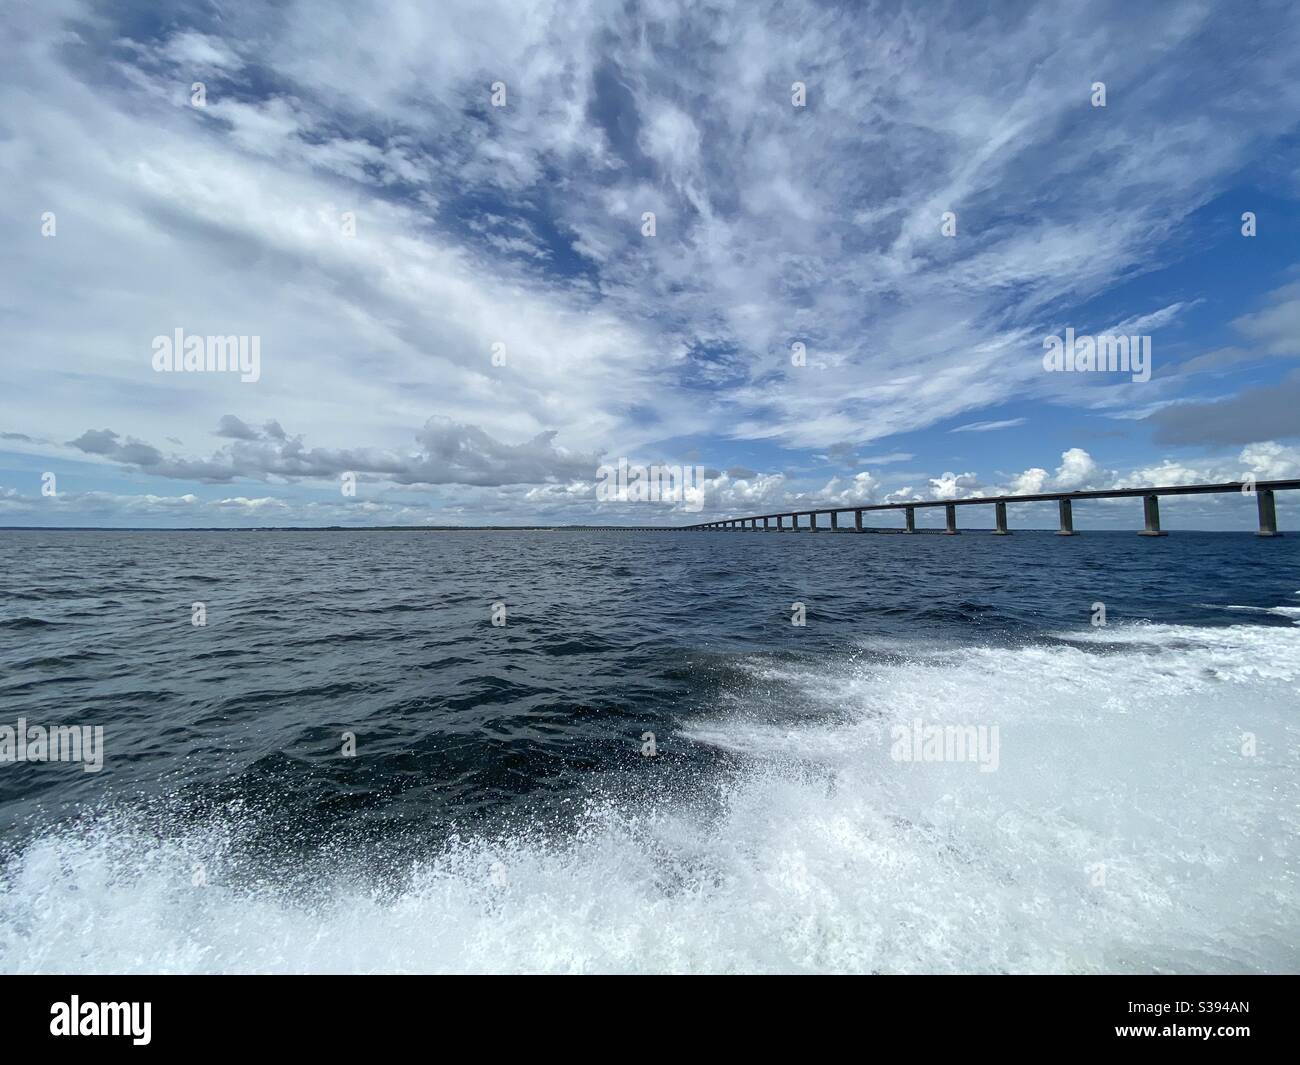 Perspective photography using long exposure on iPhone of Gulf of Mexico water and Destin Florida bridge from a boat view Stock Photo